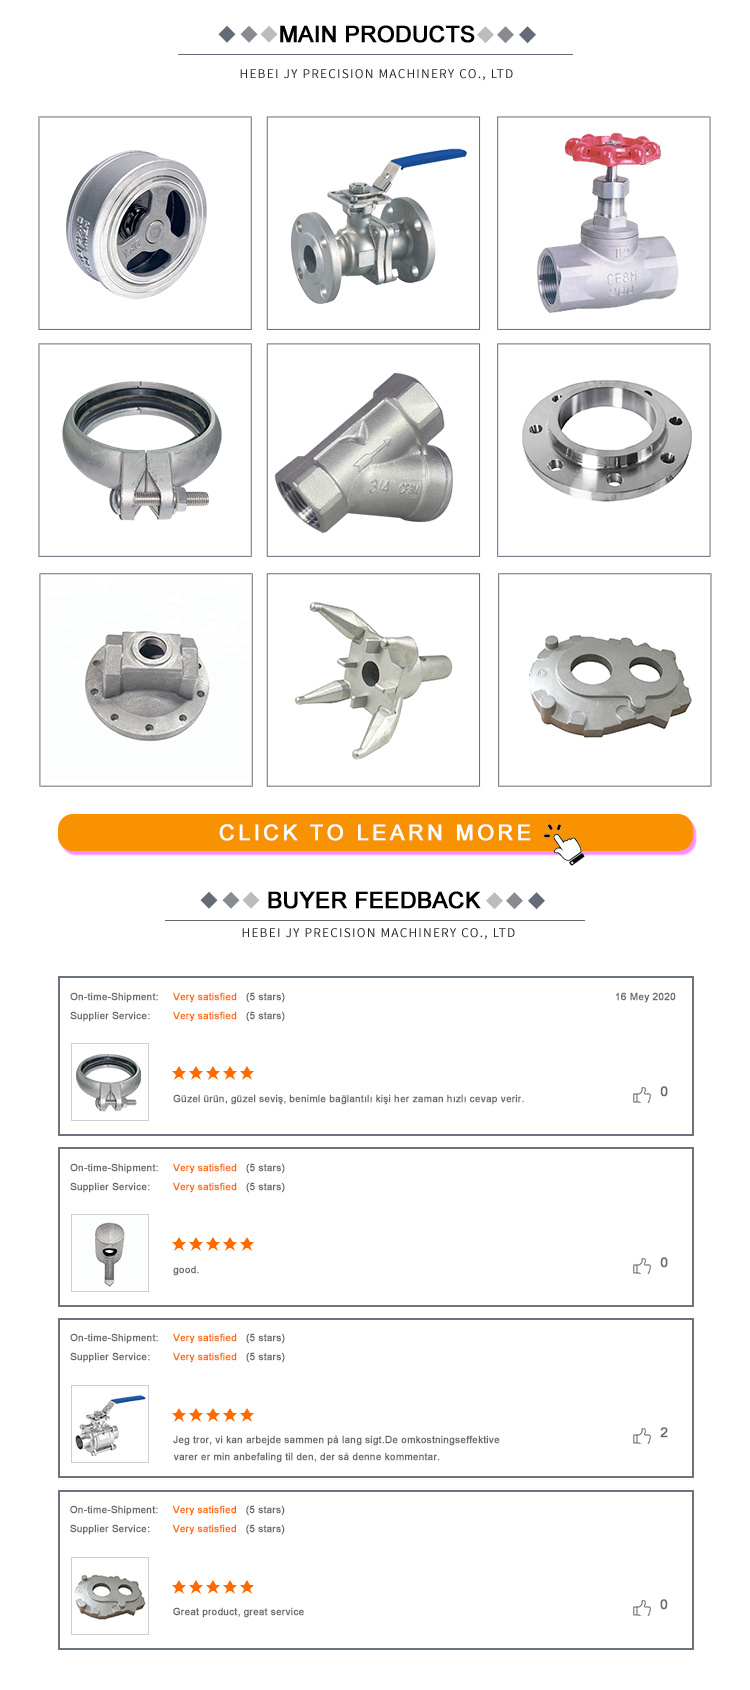 Investment Casting /Lost Wax Casting Stainless Steel Electro Polishing Parts